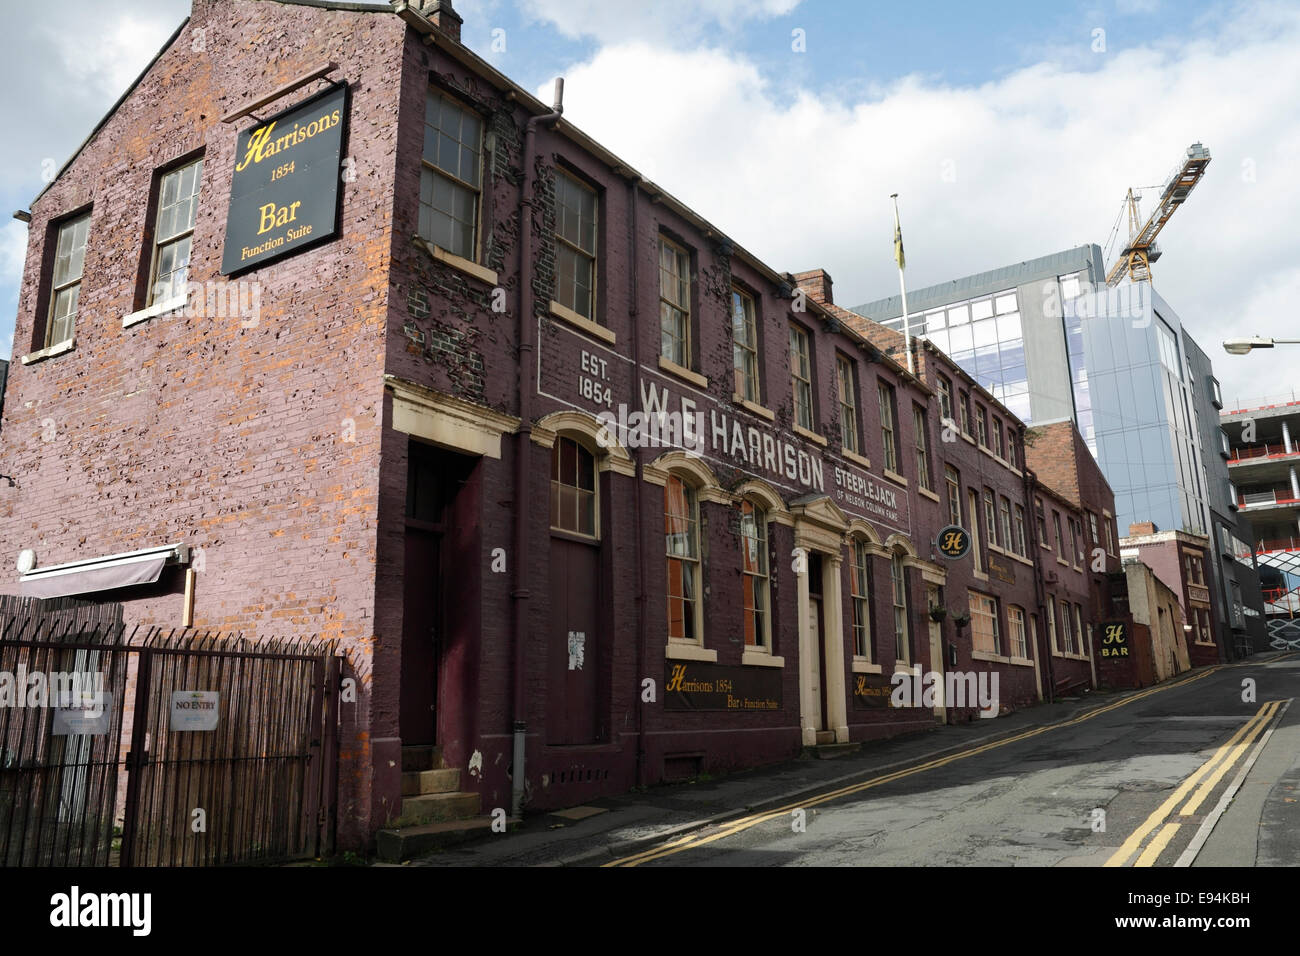 W E Harrisons steeplejack Building in Sheffield city centre England now Harrisons Bar, Building conversion listed industrial building Stock Photo